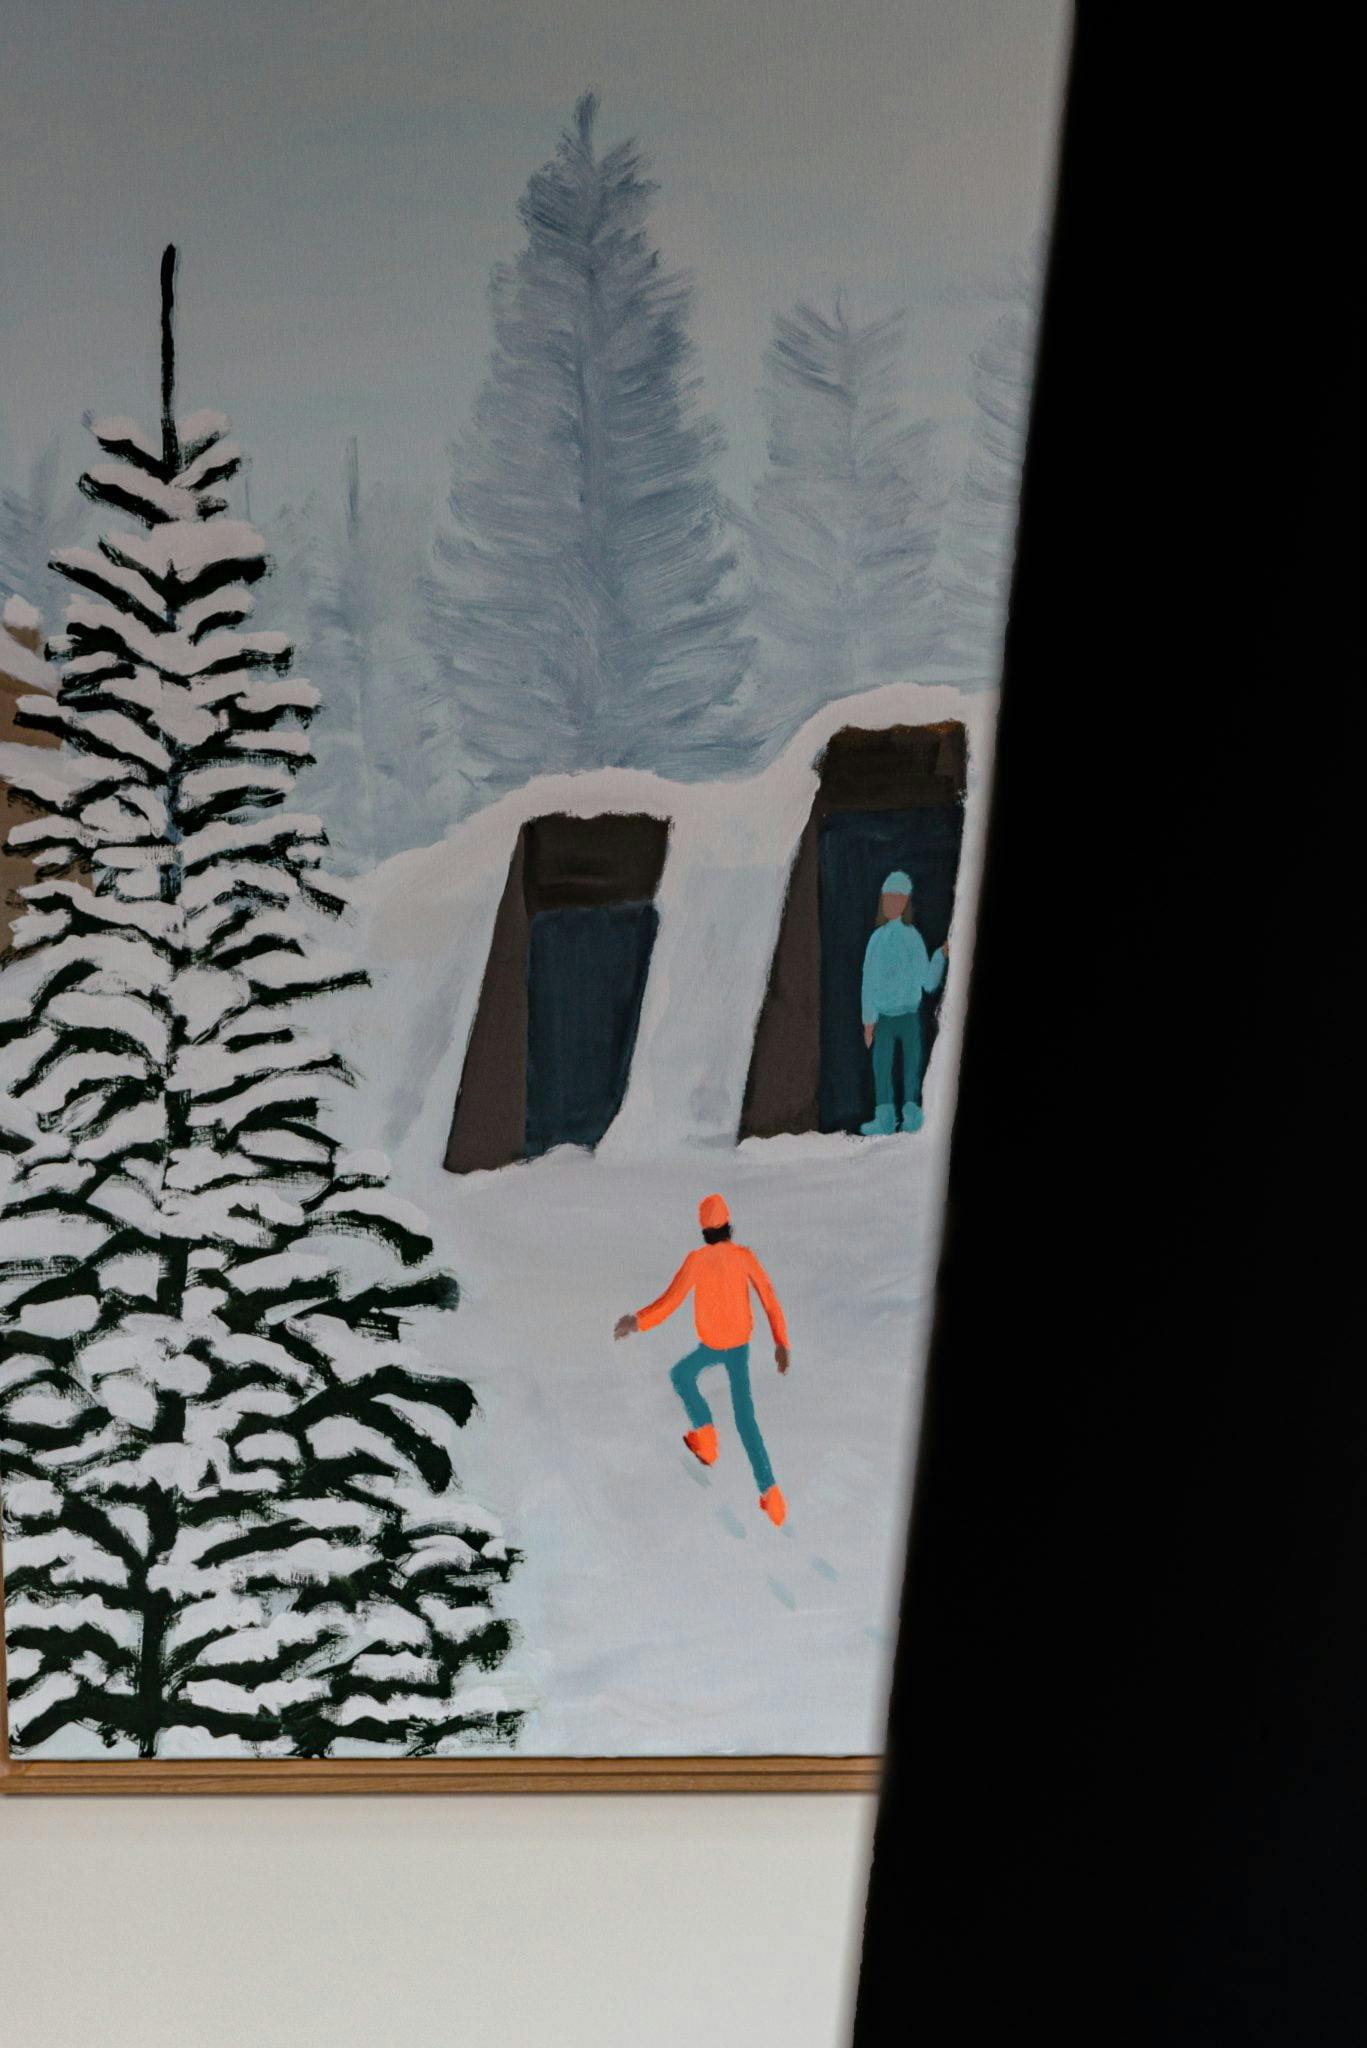 Painting by Jean Jullien depicting Le 1550 